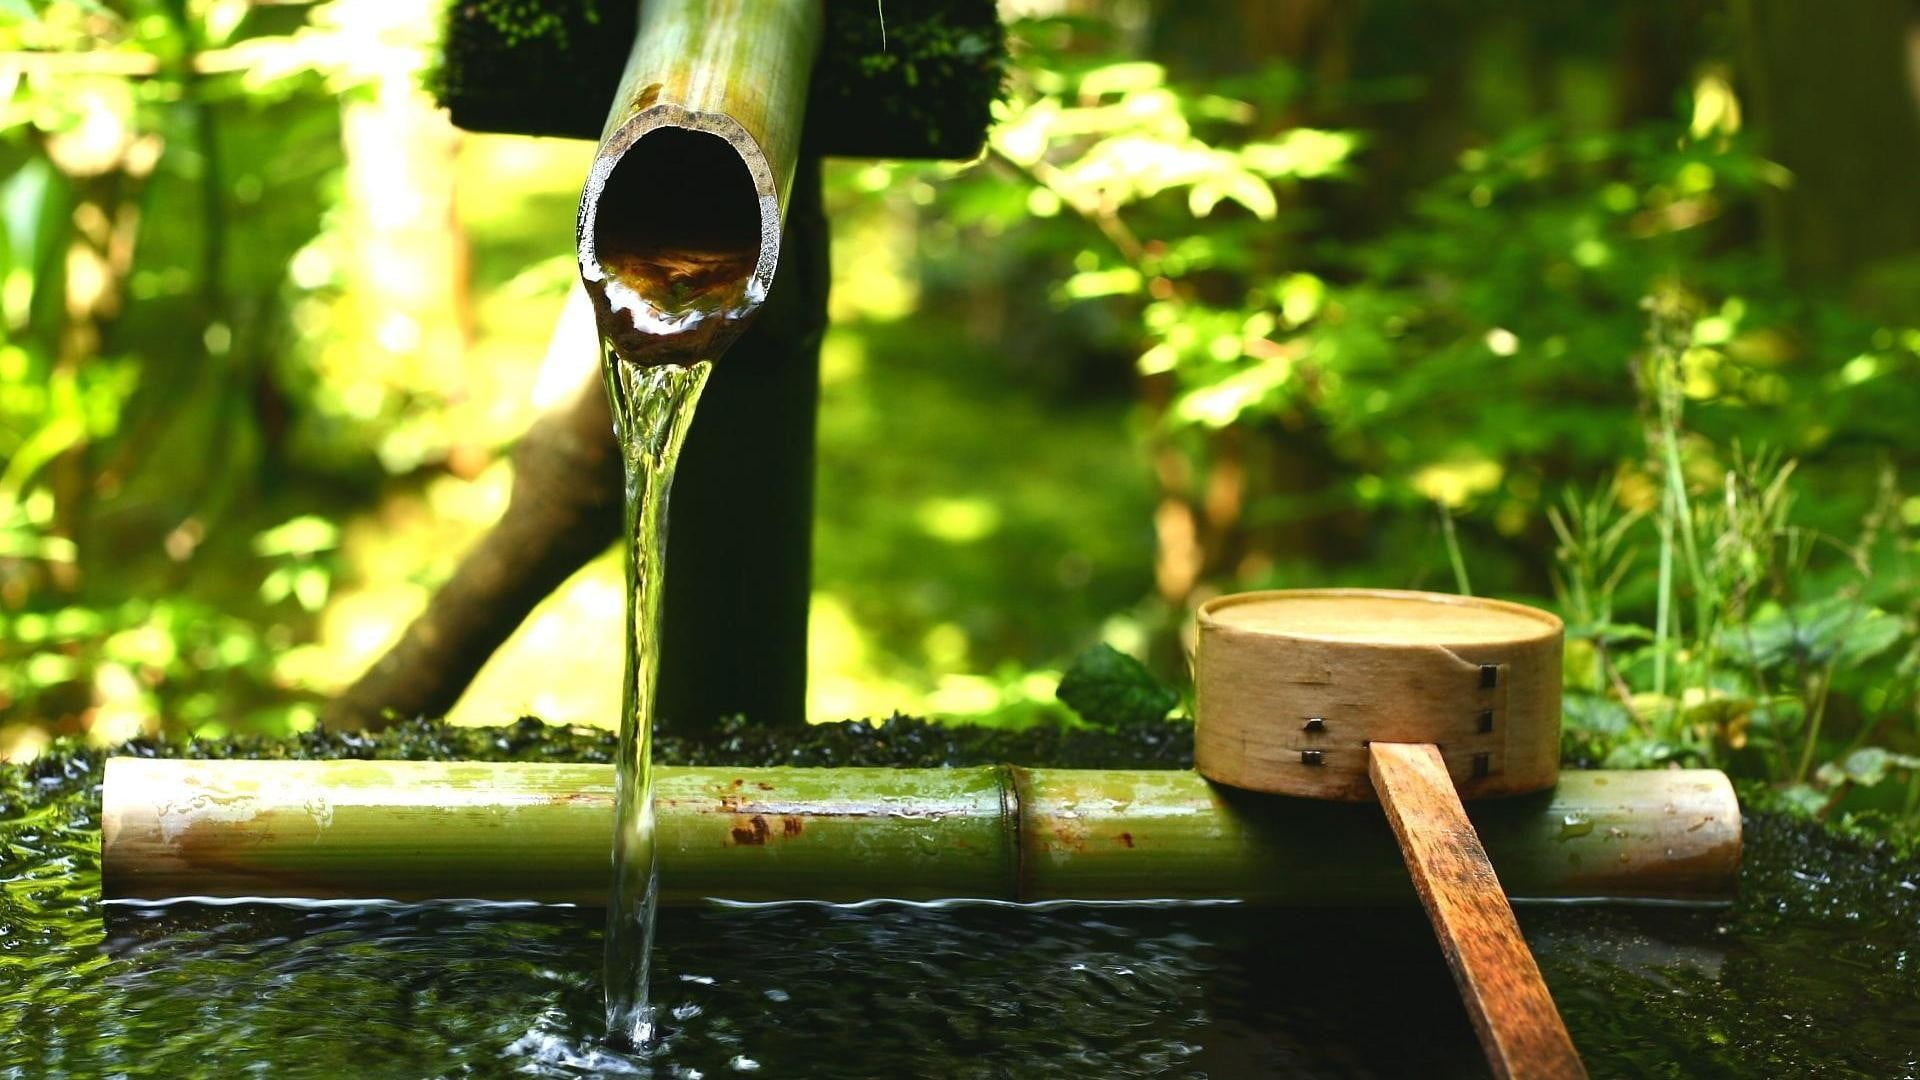 Bamboo: Brown water fountain, Nature, Plant with strength-to-weight ratio is similar to timber. 1920x1080 Full HD Wallpaper.